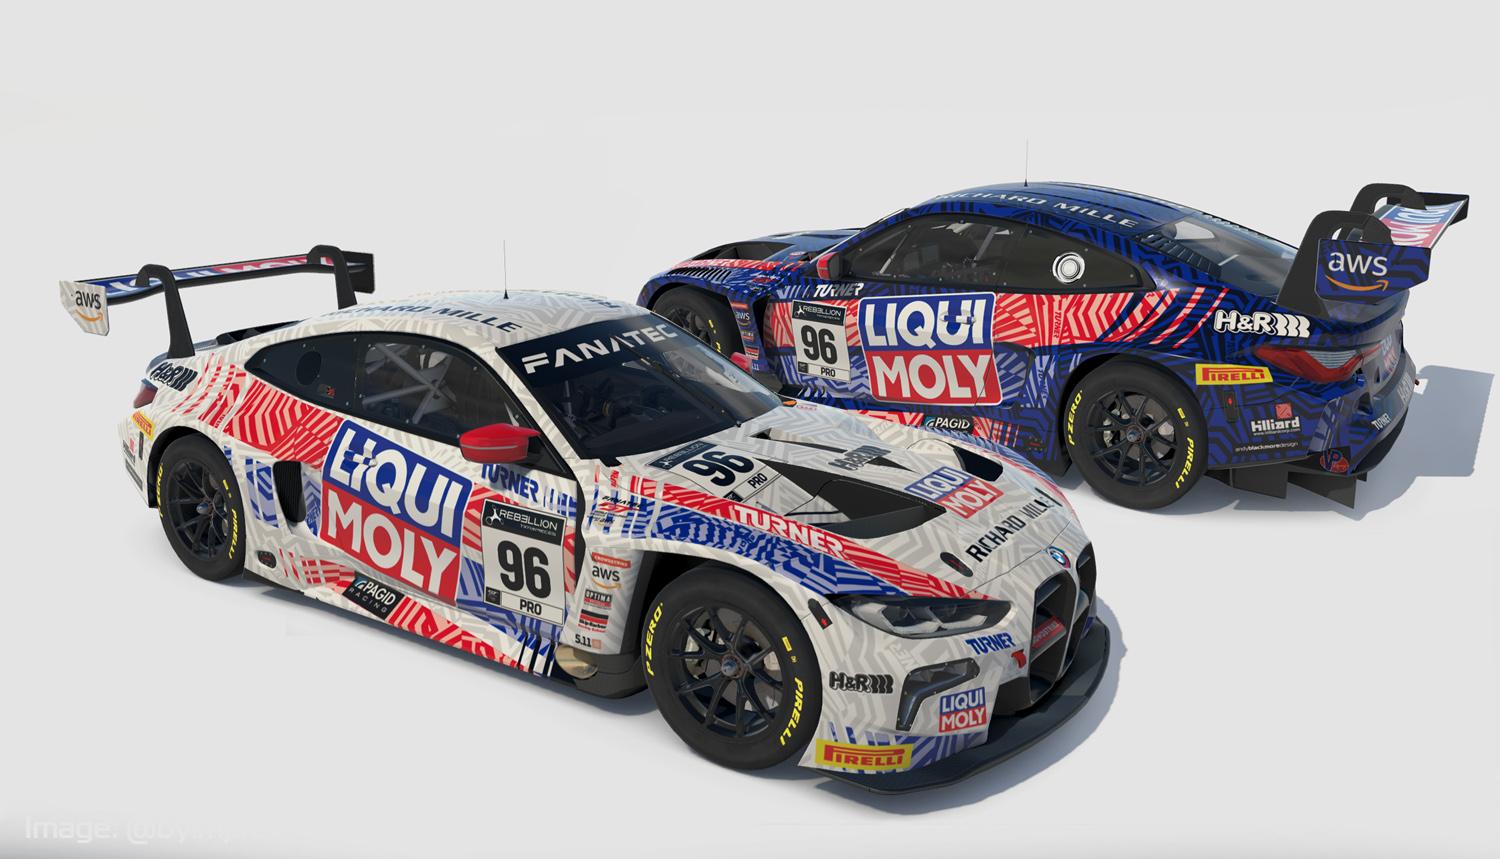 Preview of 2022 Turner Motorsport BMW M4 GT3 (SRO Indy 8hr livery) by Andy Blackmore